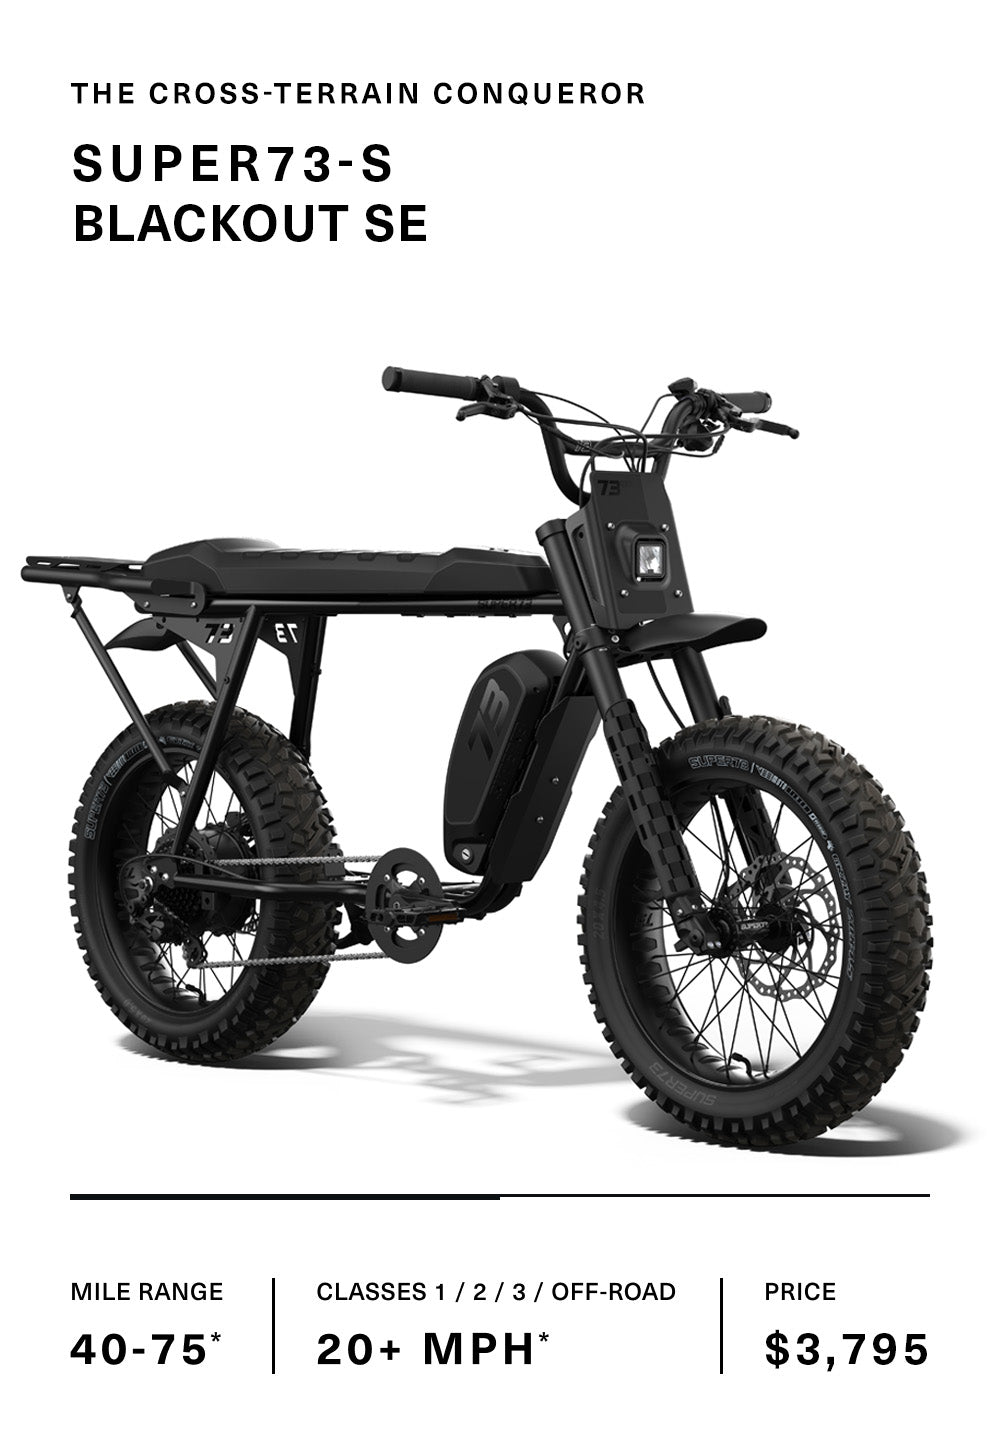 Image of the SUPER73-S Blackout SE bike with specs.